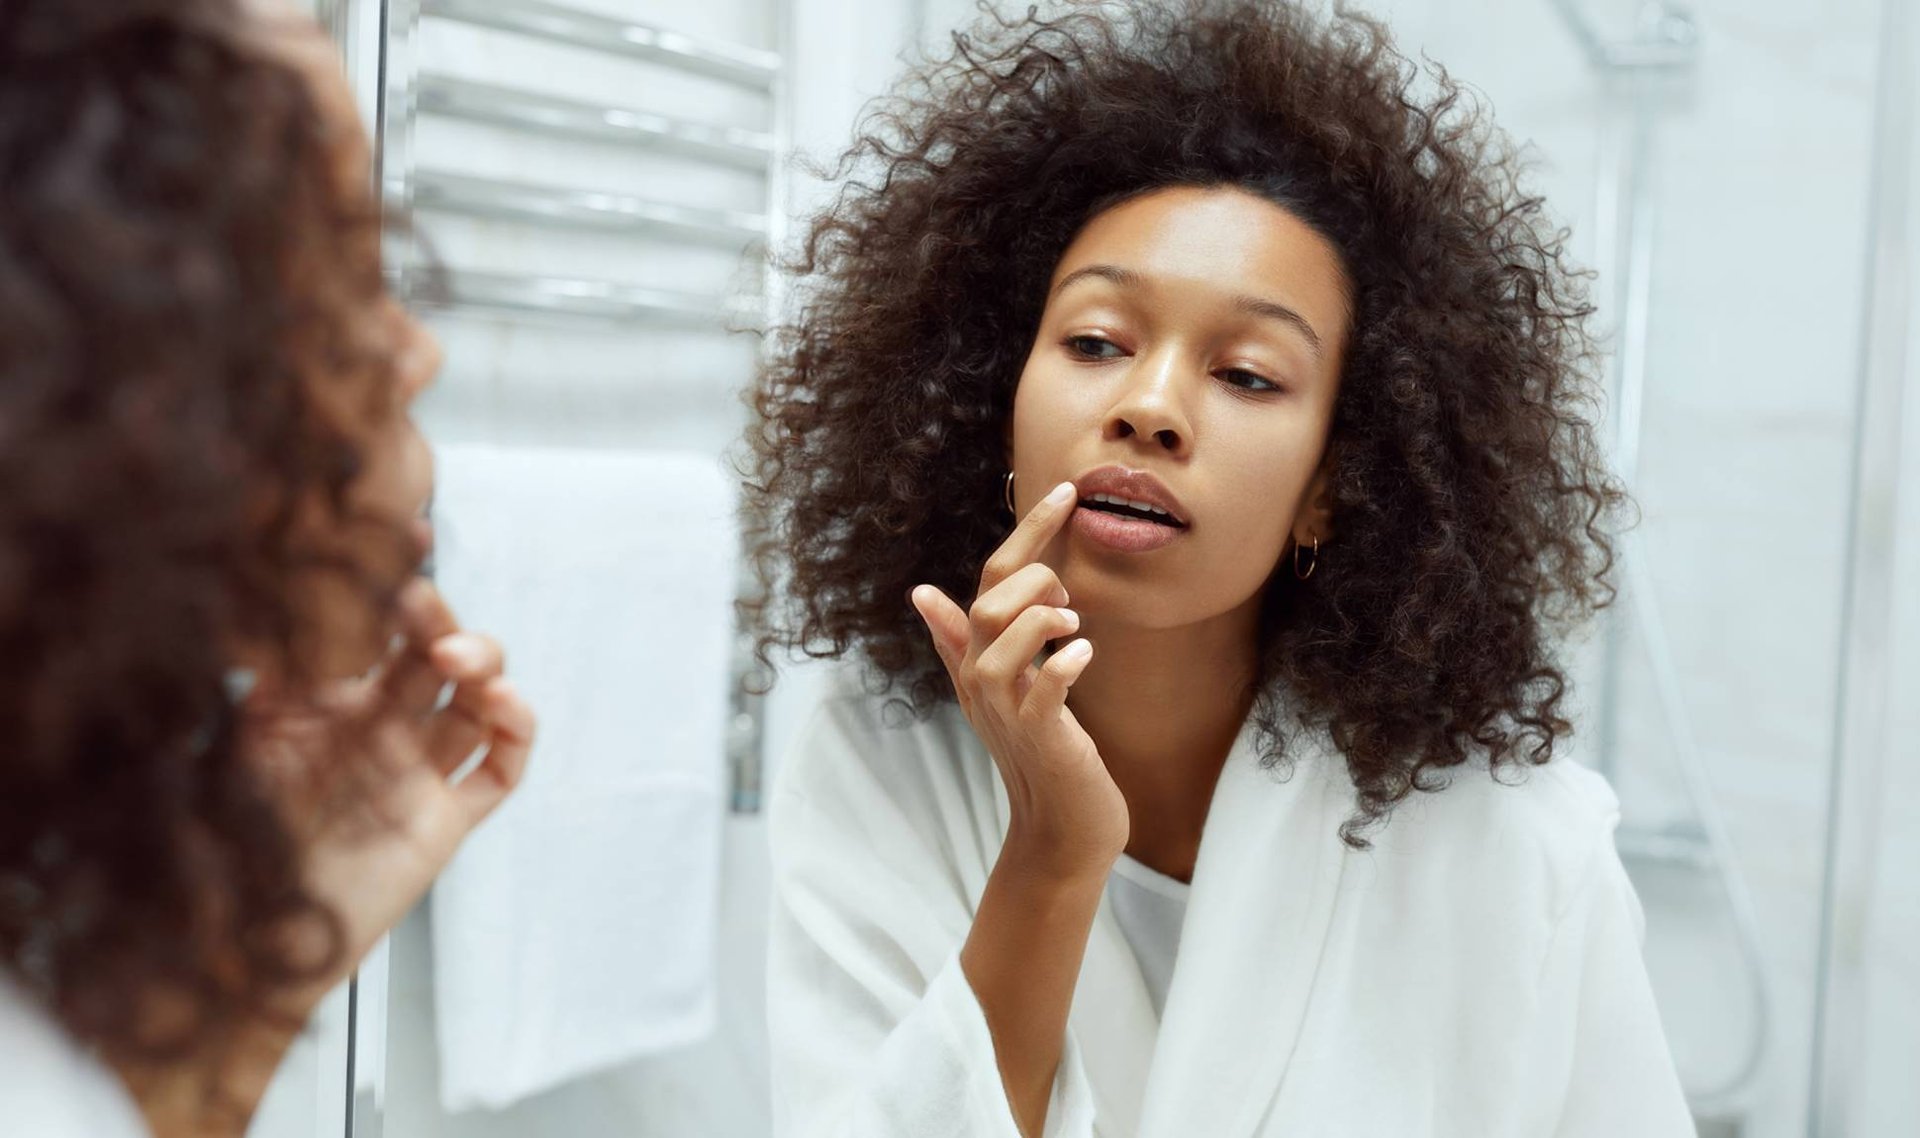 Derm DMs: Why Do I Have Dry Skin Around My Mouth?